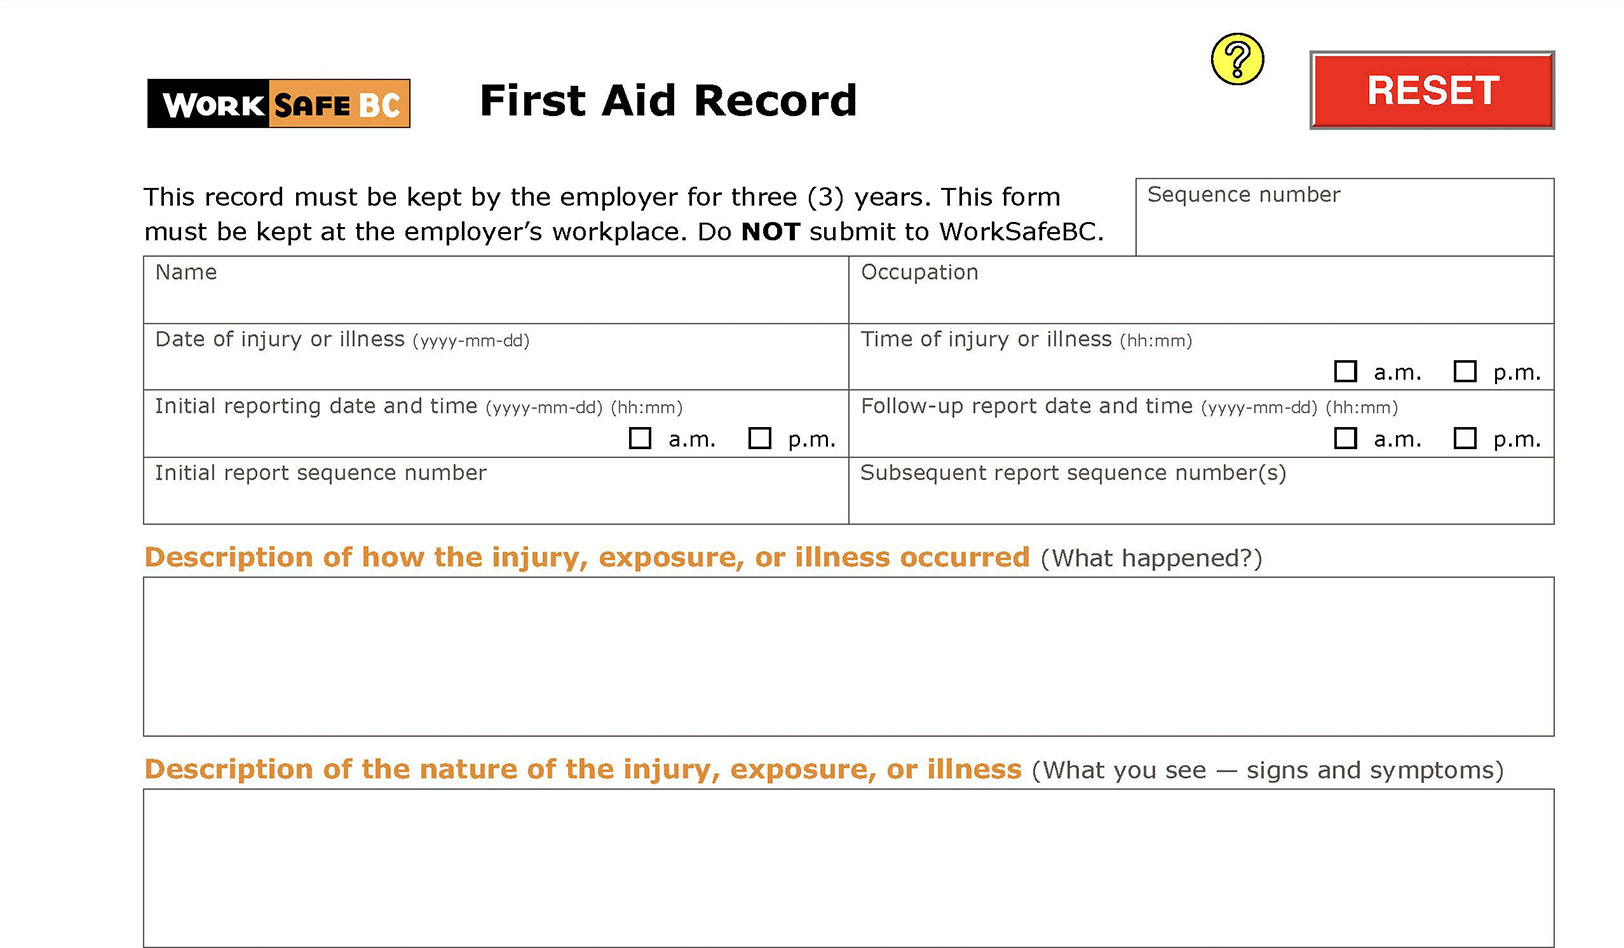 First Aid Record (Form 55B23)